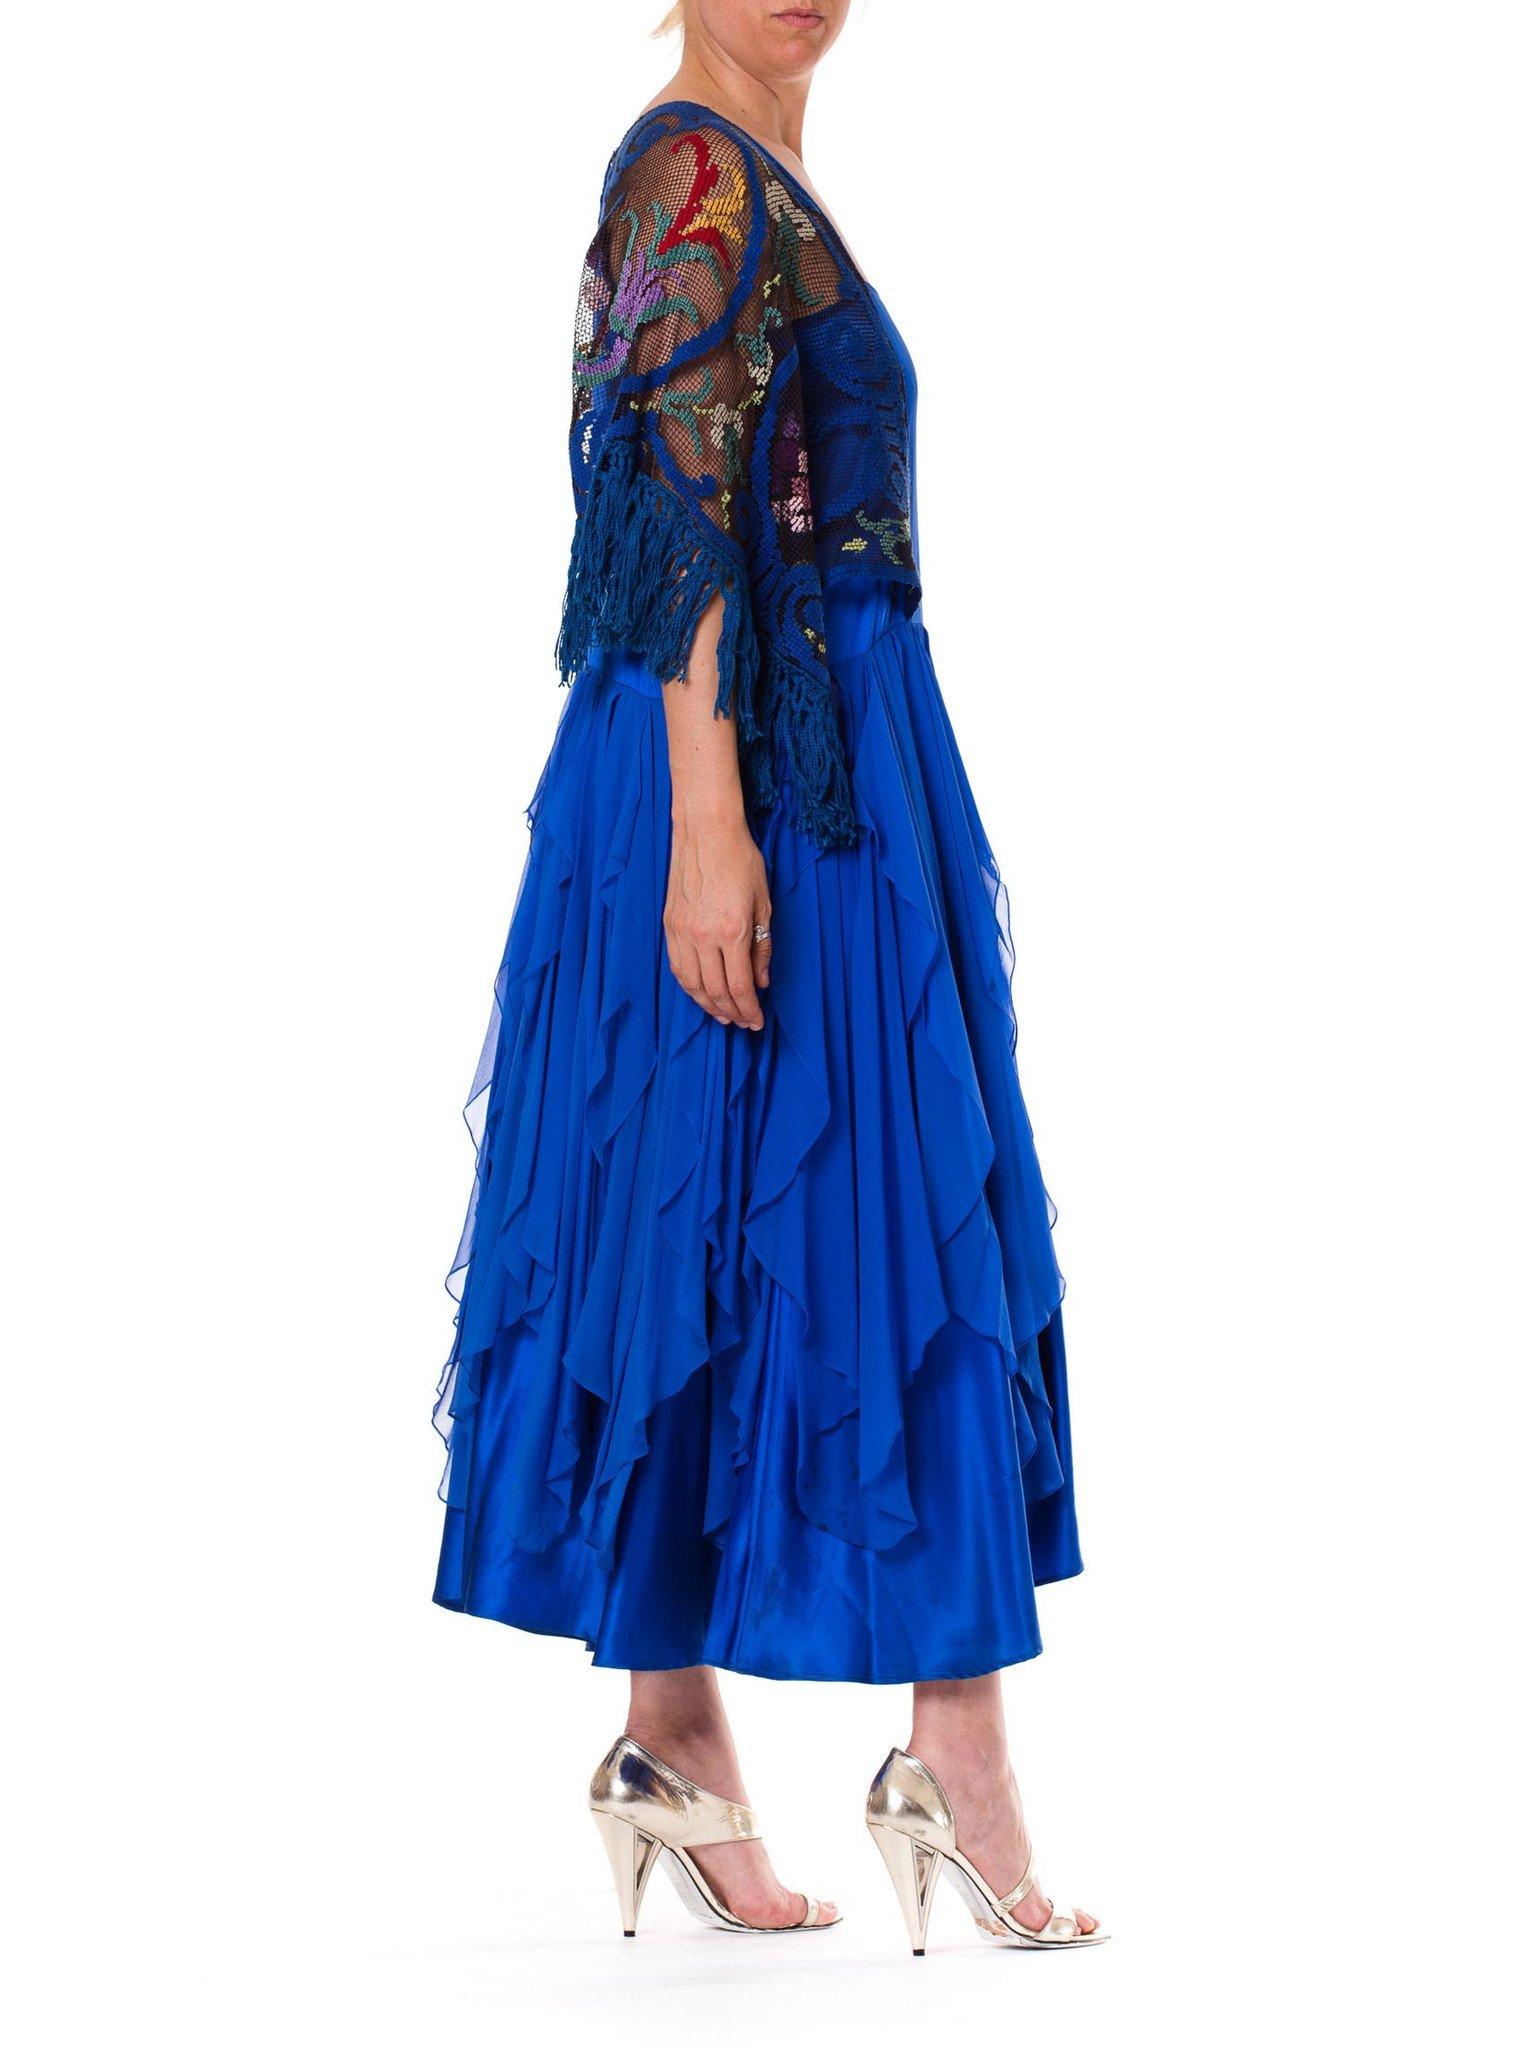 Blue Silk Charmeuse  & Chiffon Dress With Antique Lace Sleeves For Sale 2